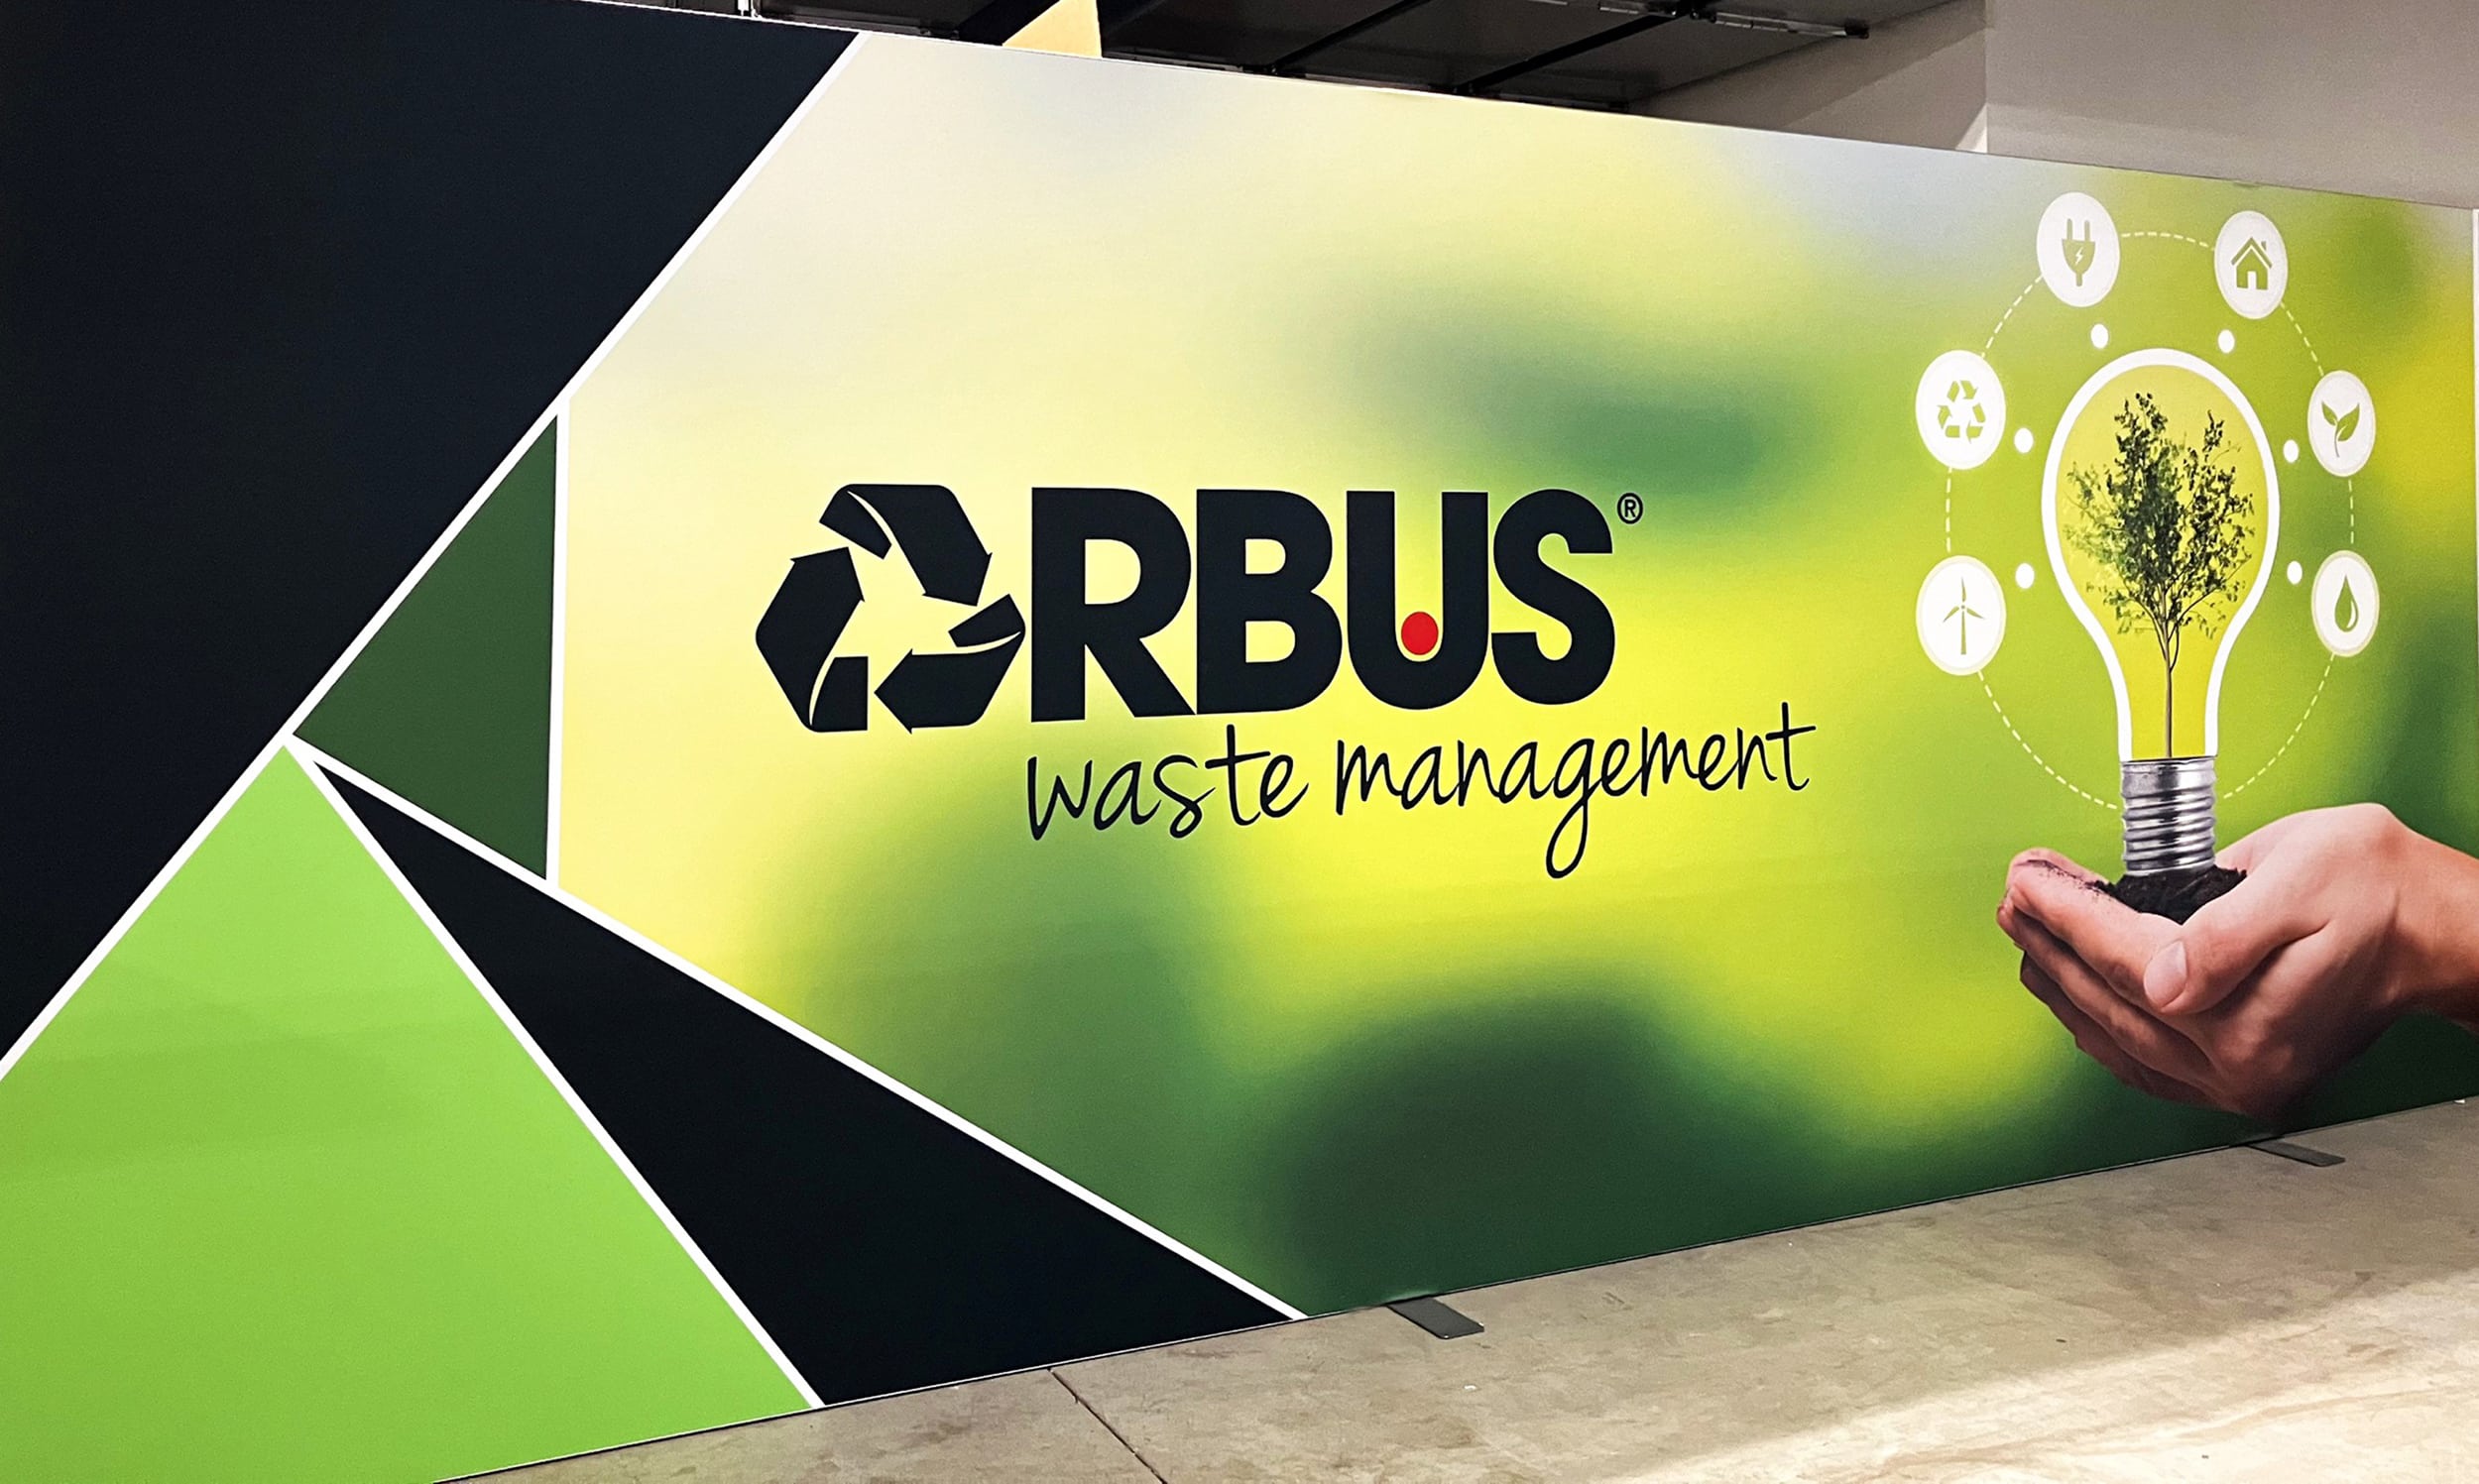 TRENDING NOW: Orbus and Vycom are among the companies with major sustainability programs.